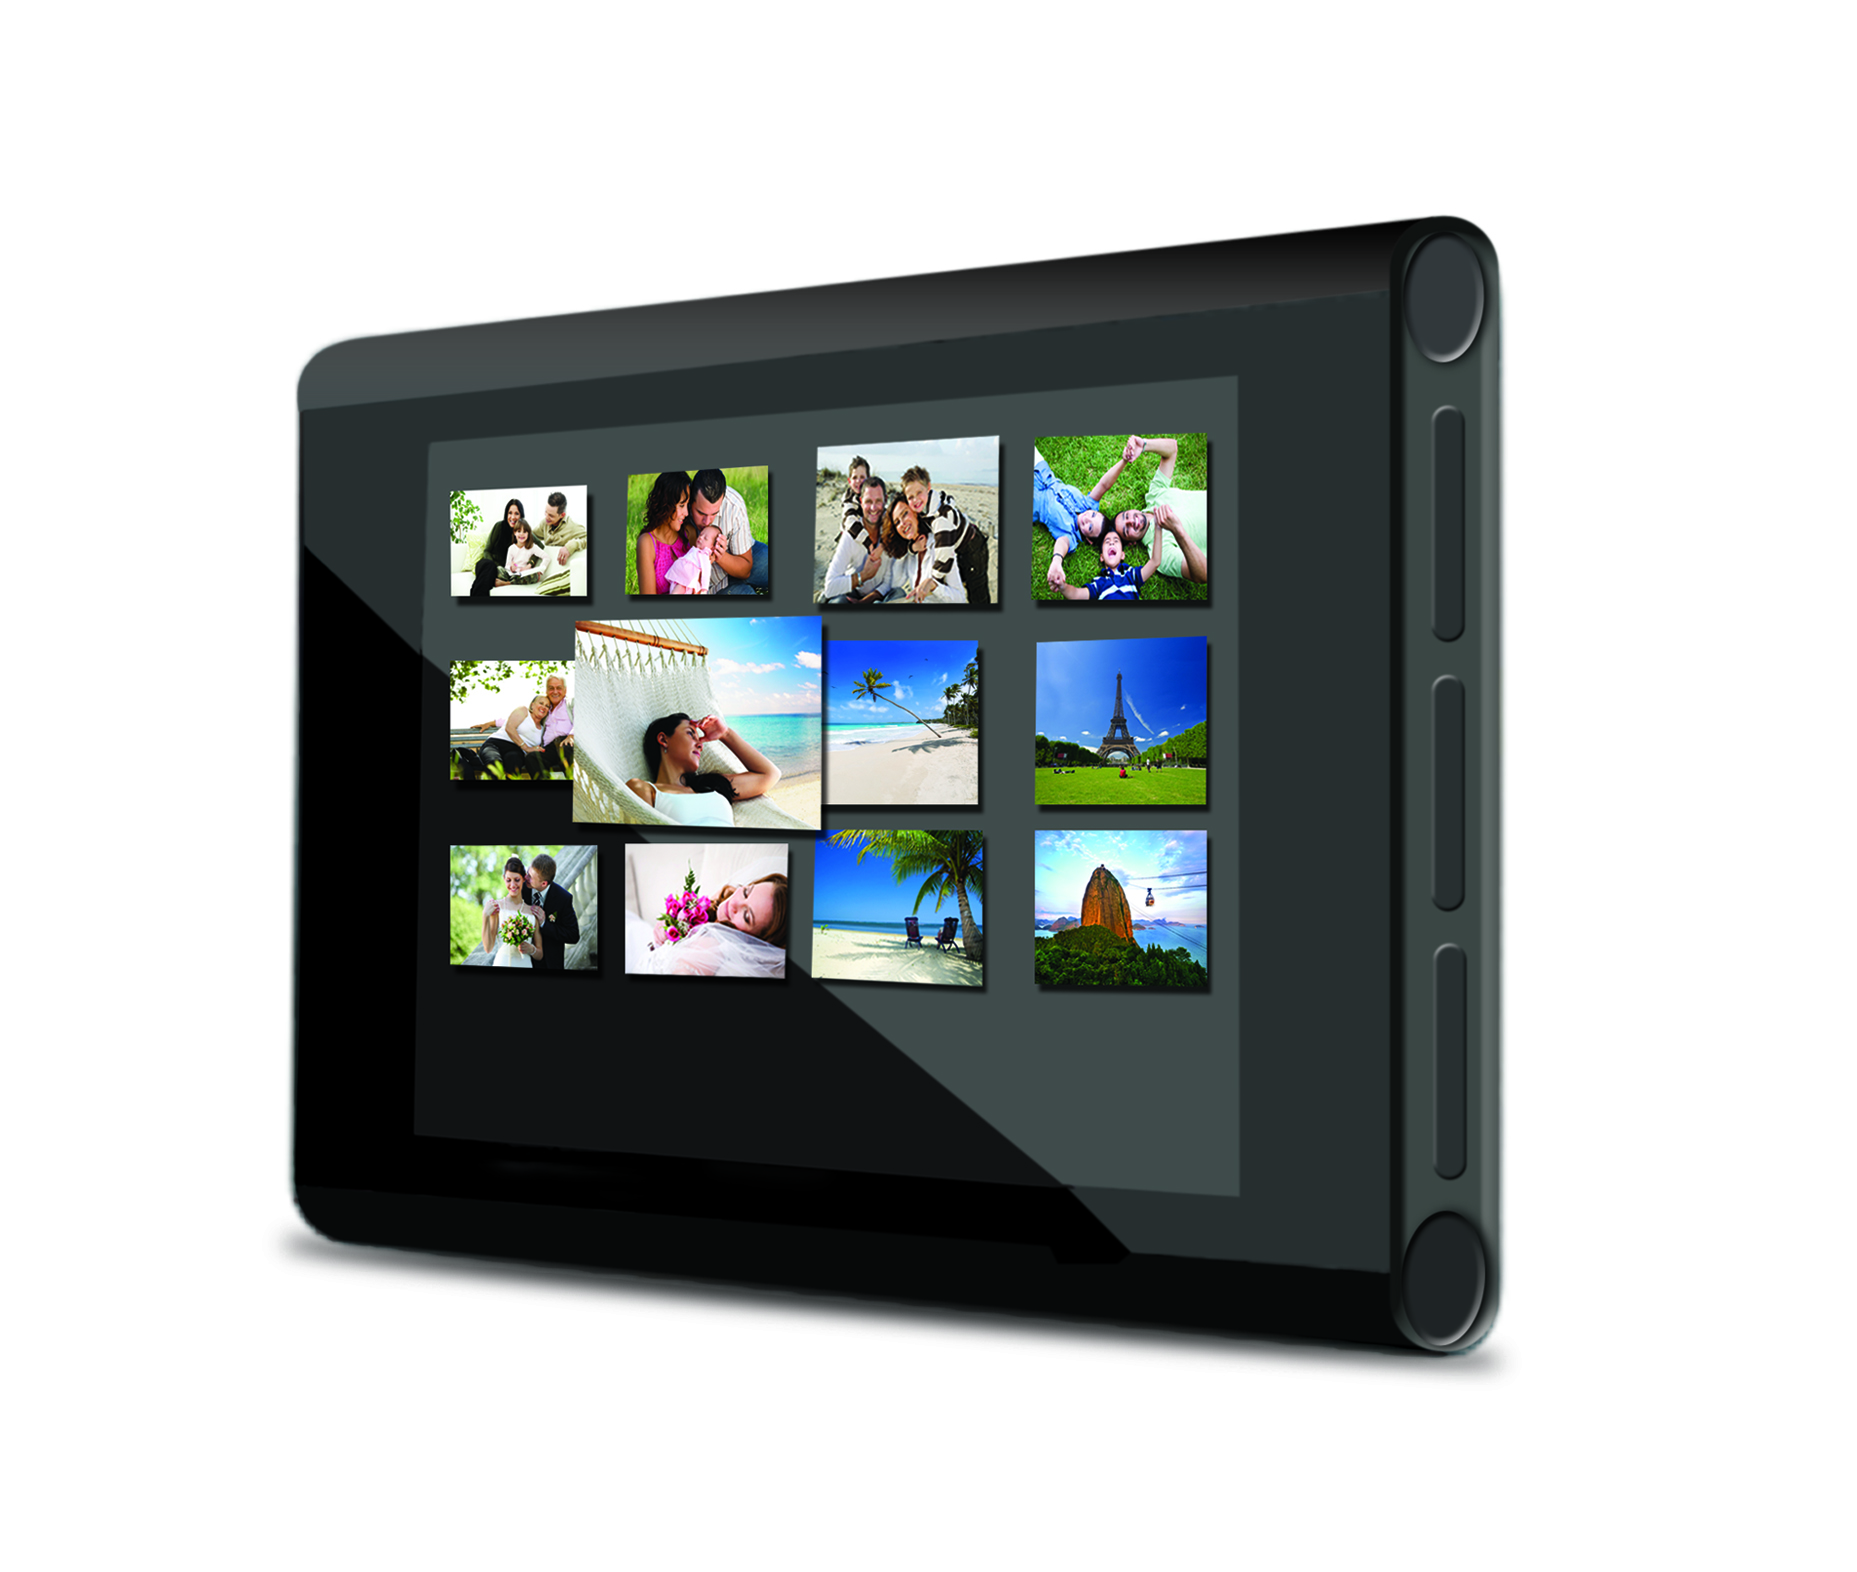 AVLabs Portable Photo Gallery Is Like A Smartphone Without The Features